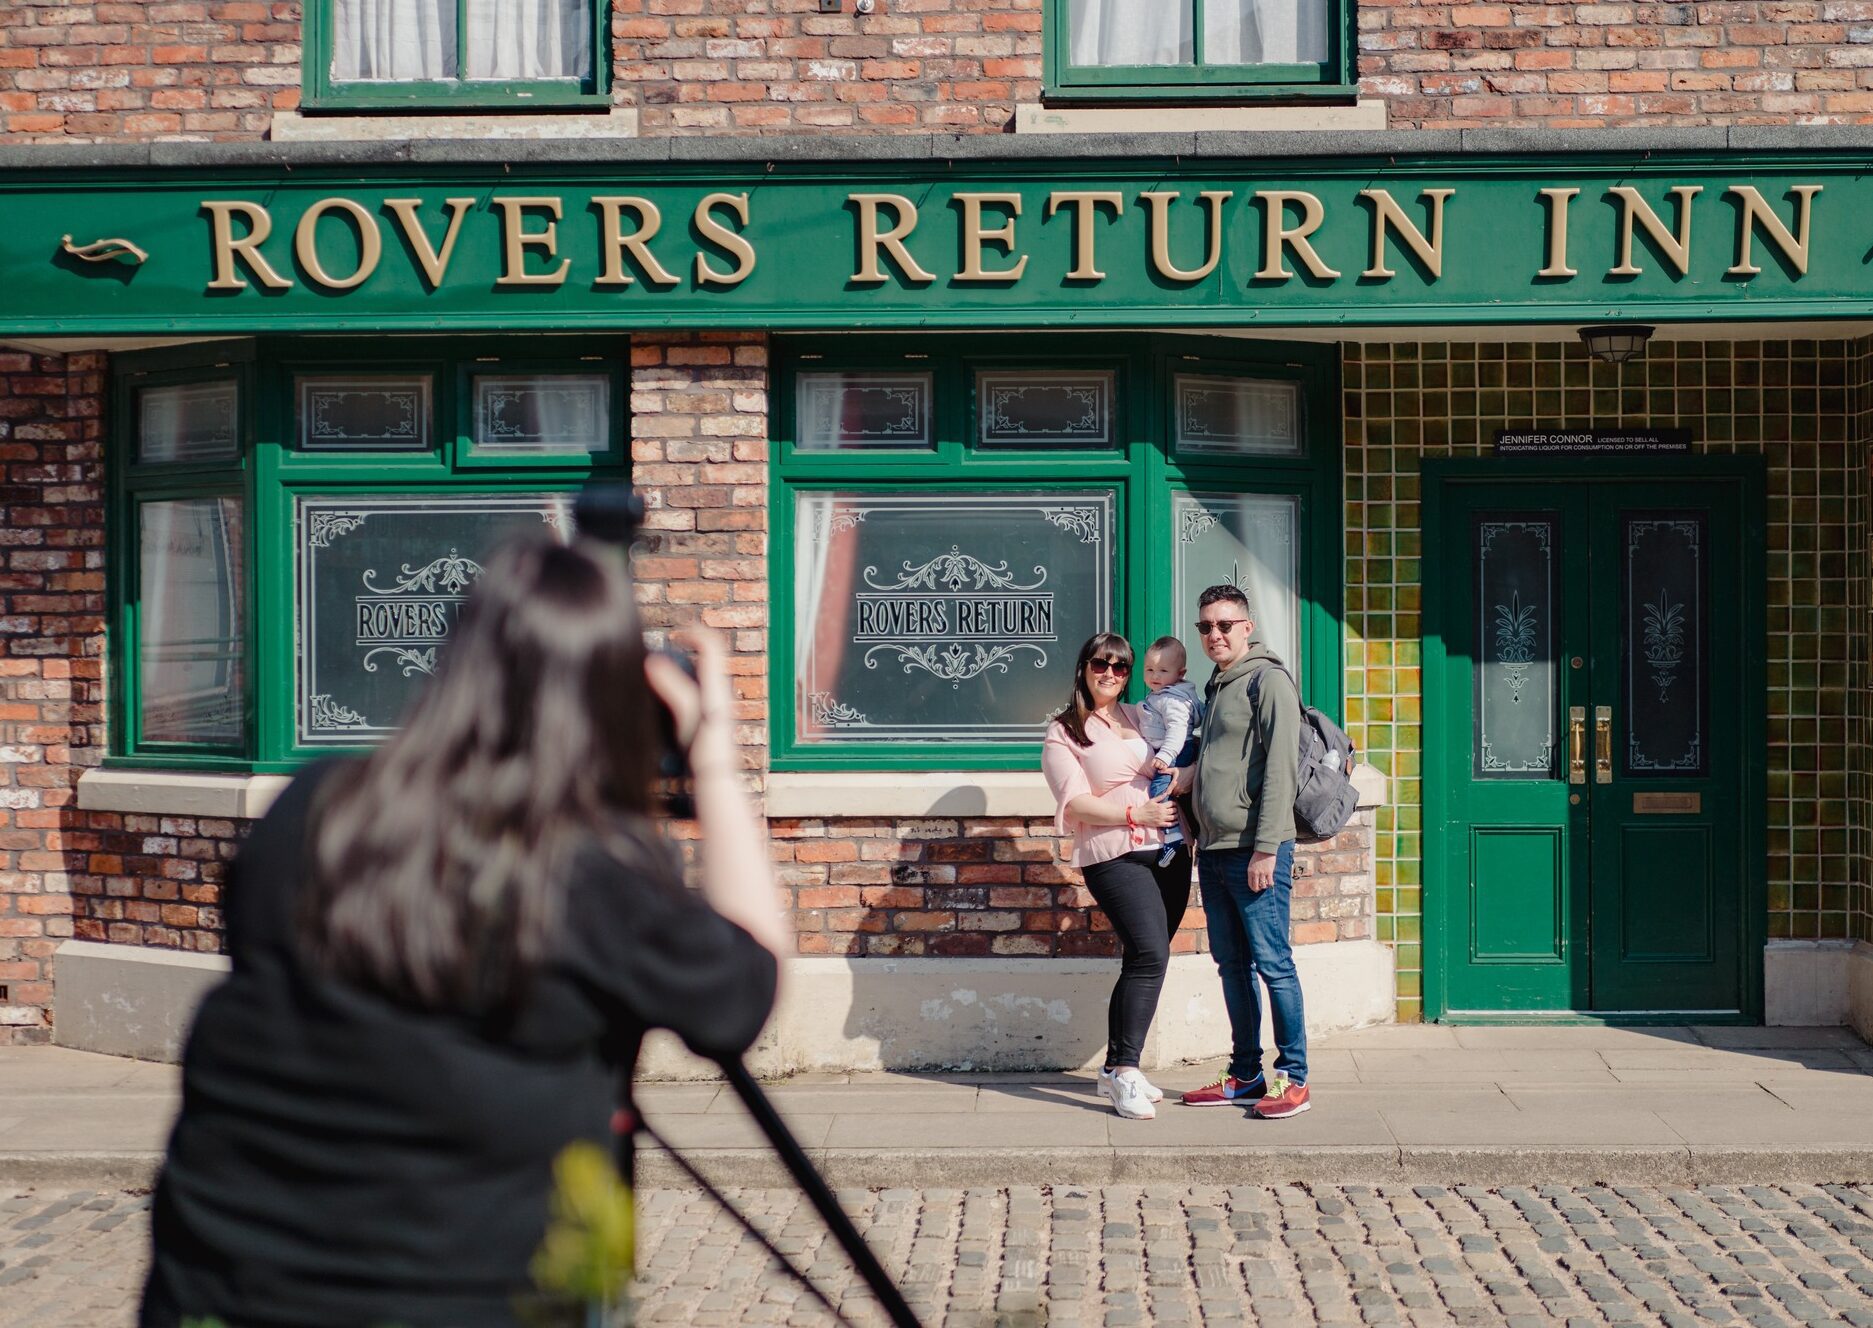 You can meet &#8216;mystery&#8217; cast members on the new Coronation Street Stars Tour, The Manc